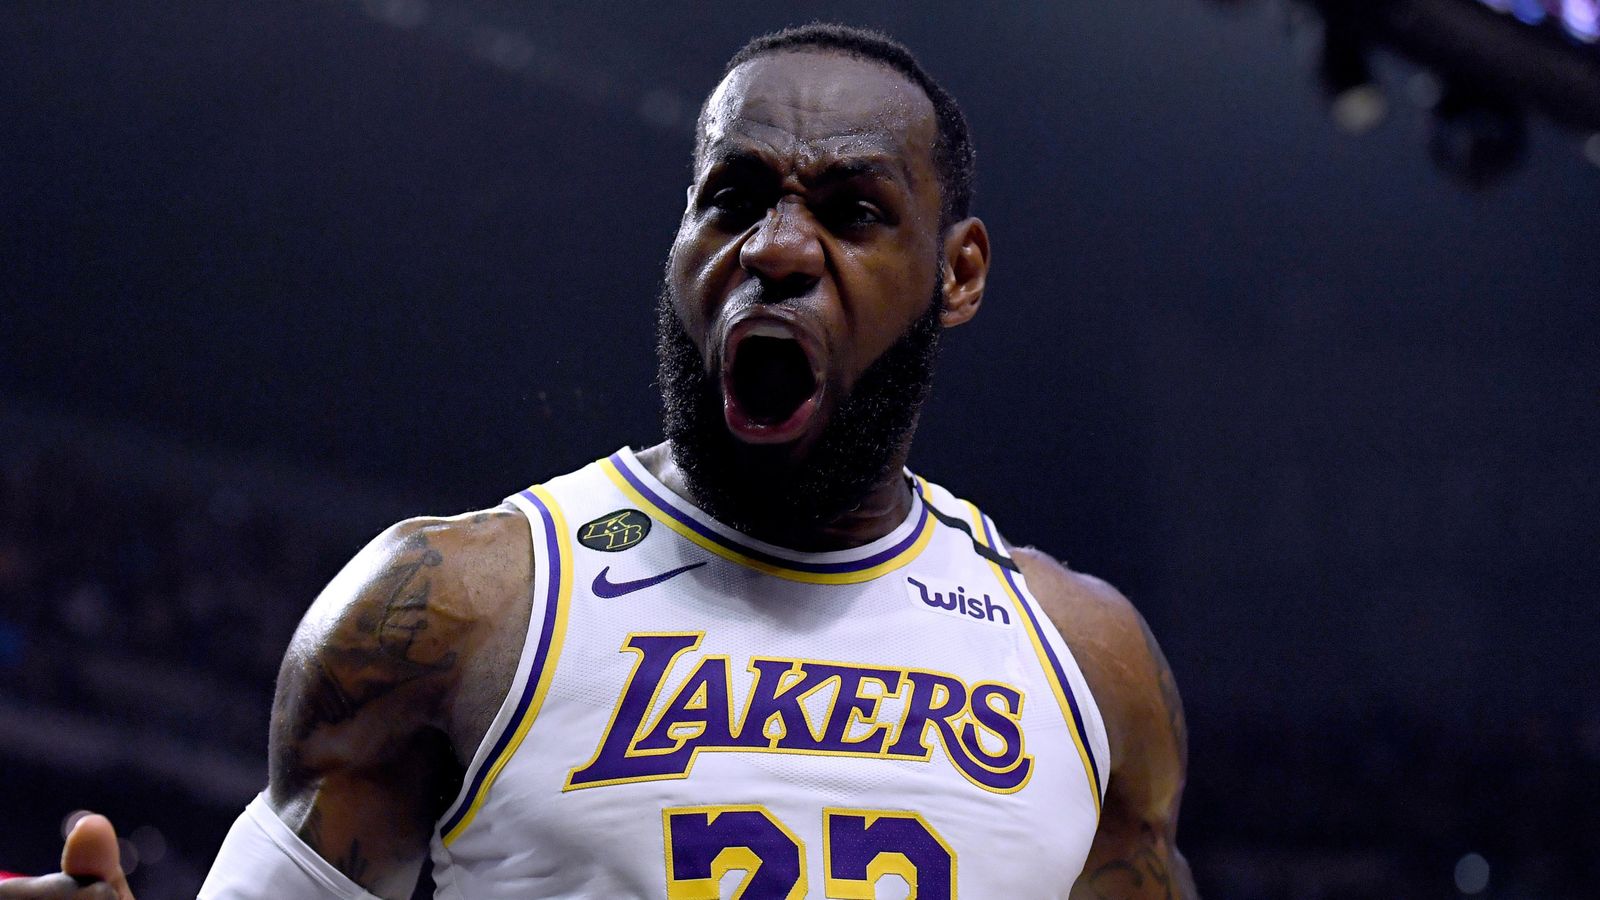 NBA scores, highlights, results: LeBron James puts on show in Lakers win;  Spurs beat Mavericks to extend winning streak 